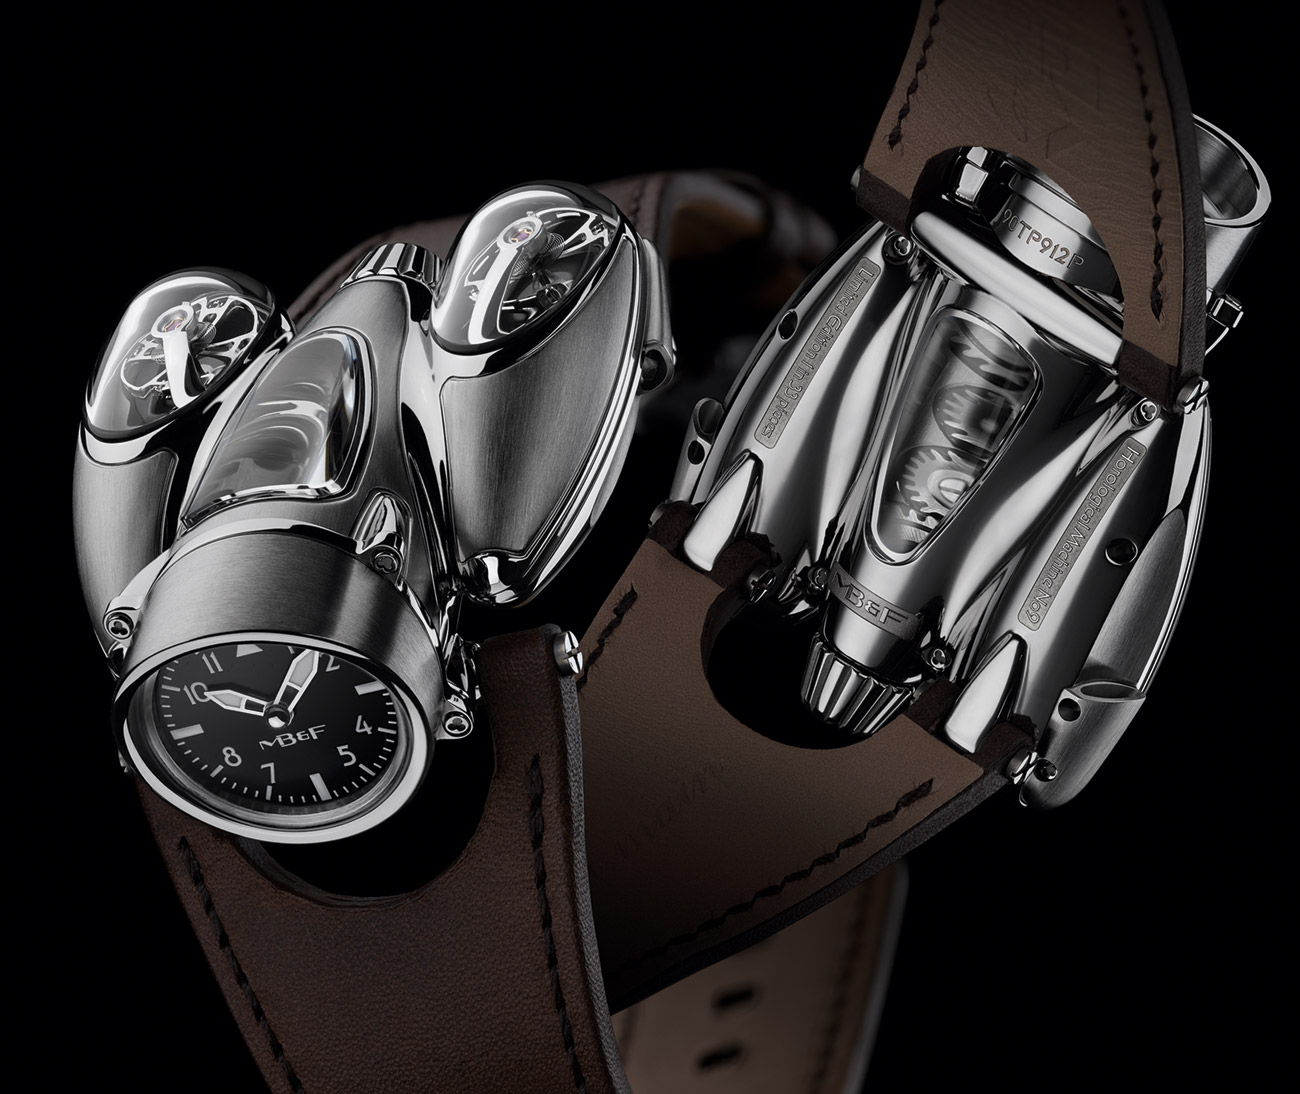 MB&F's new Horological Machine No. 9 Flow watches MBF-Horological-Machine-No-9-HM9-Flow-Air-Road-aBlogtoWatch-1